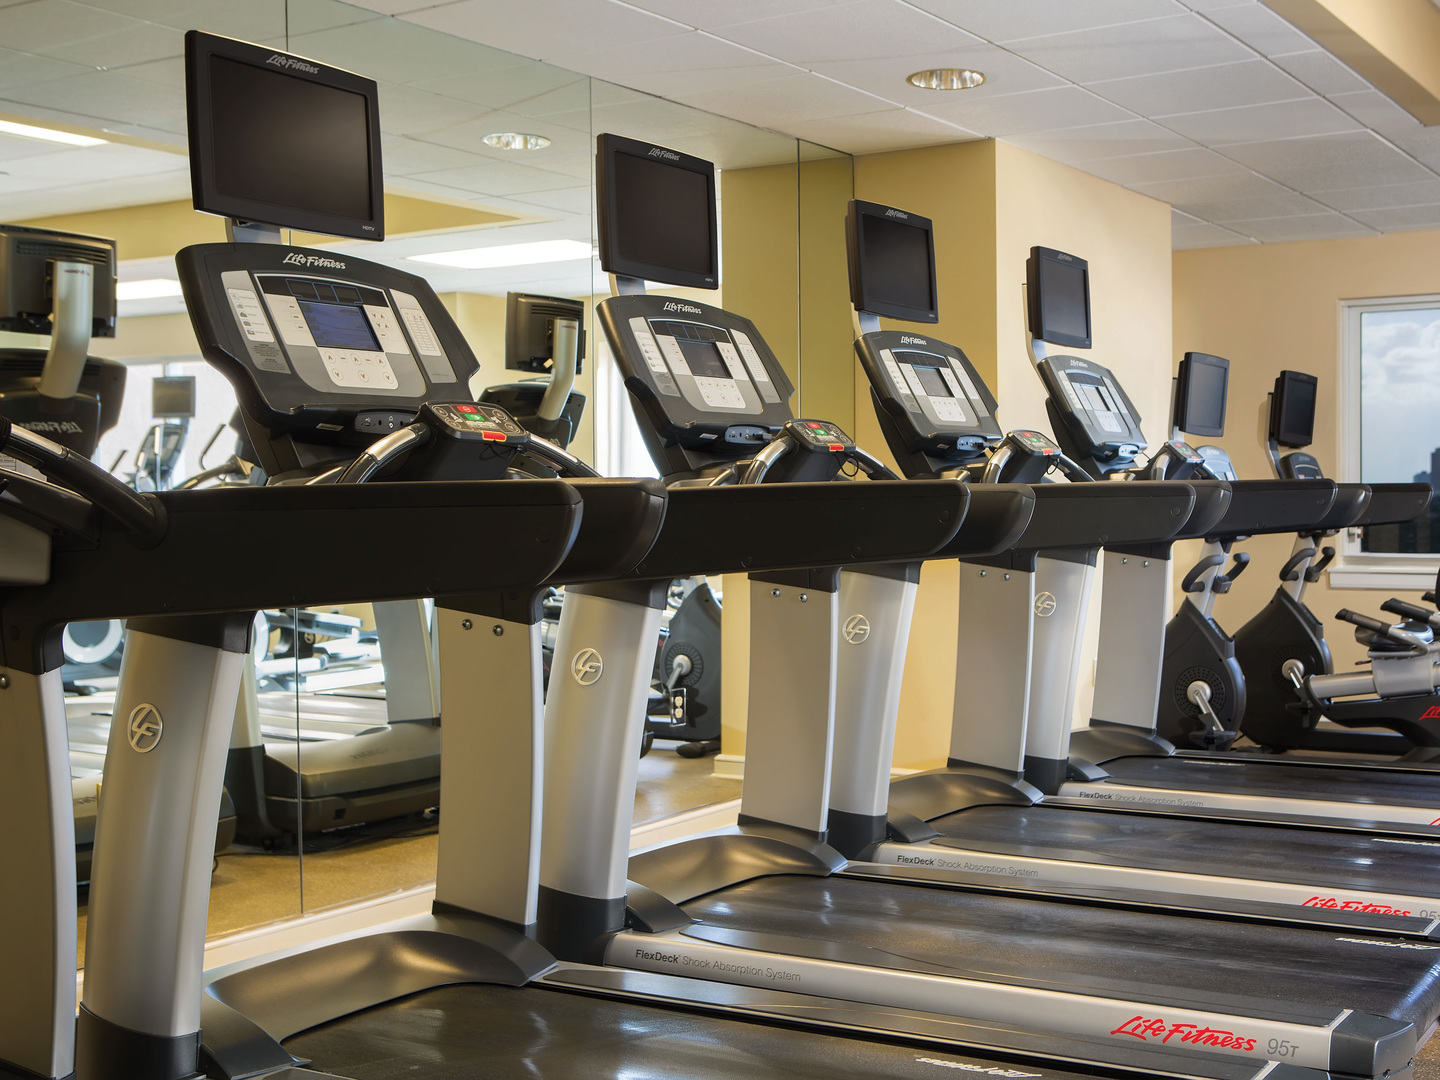 Marriott's BeachPlace Towers Fitness Center. Marriott's BeachPlace Towers is located in Fort Lauderdale, Florida United States.